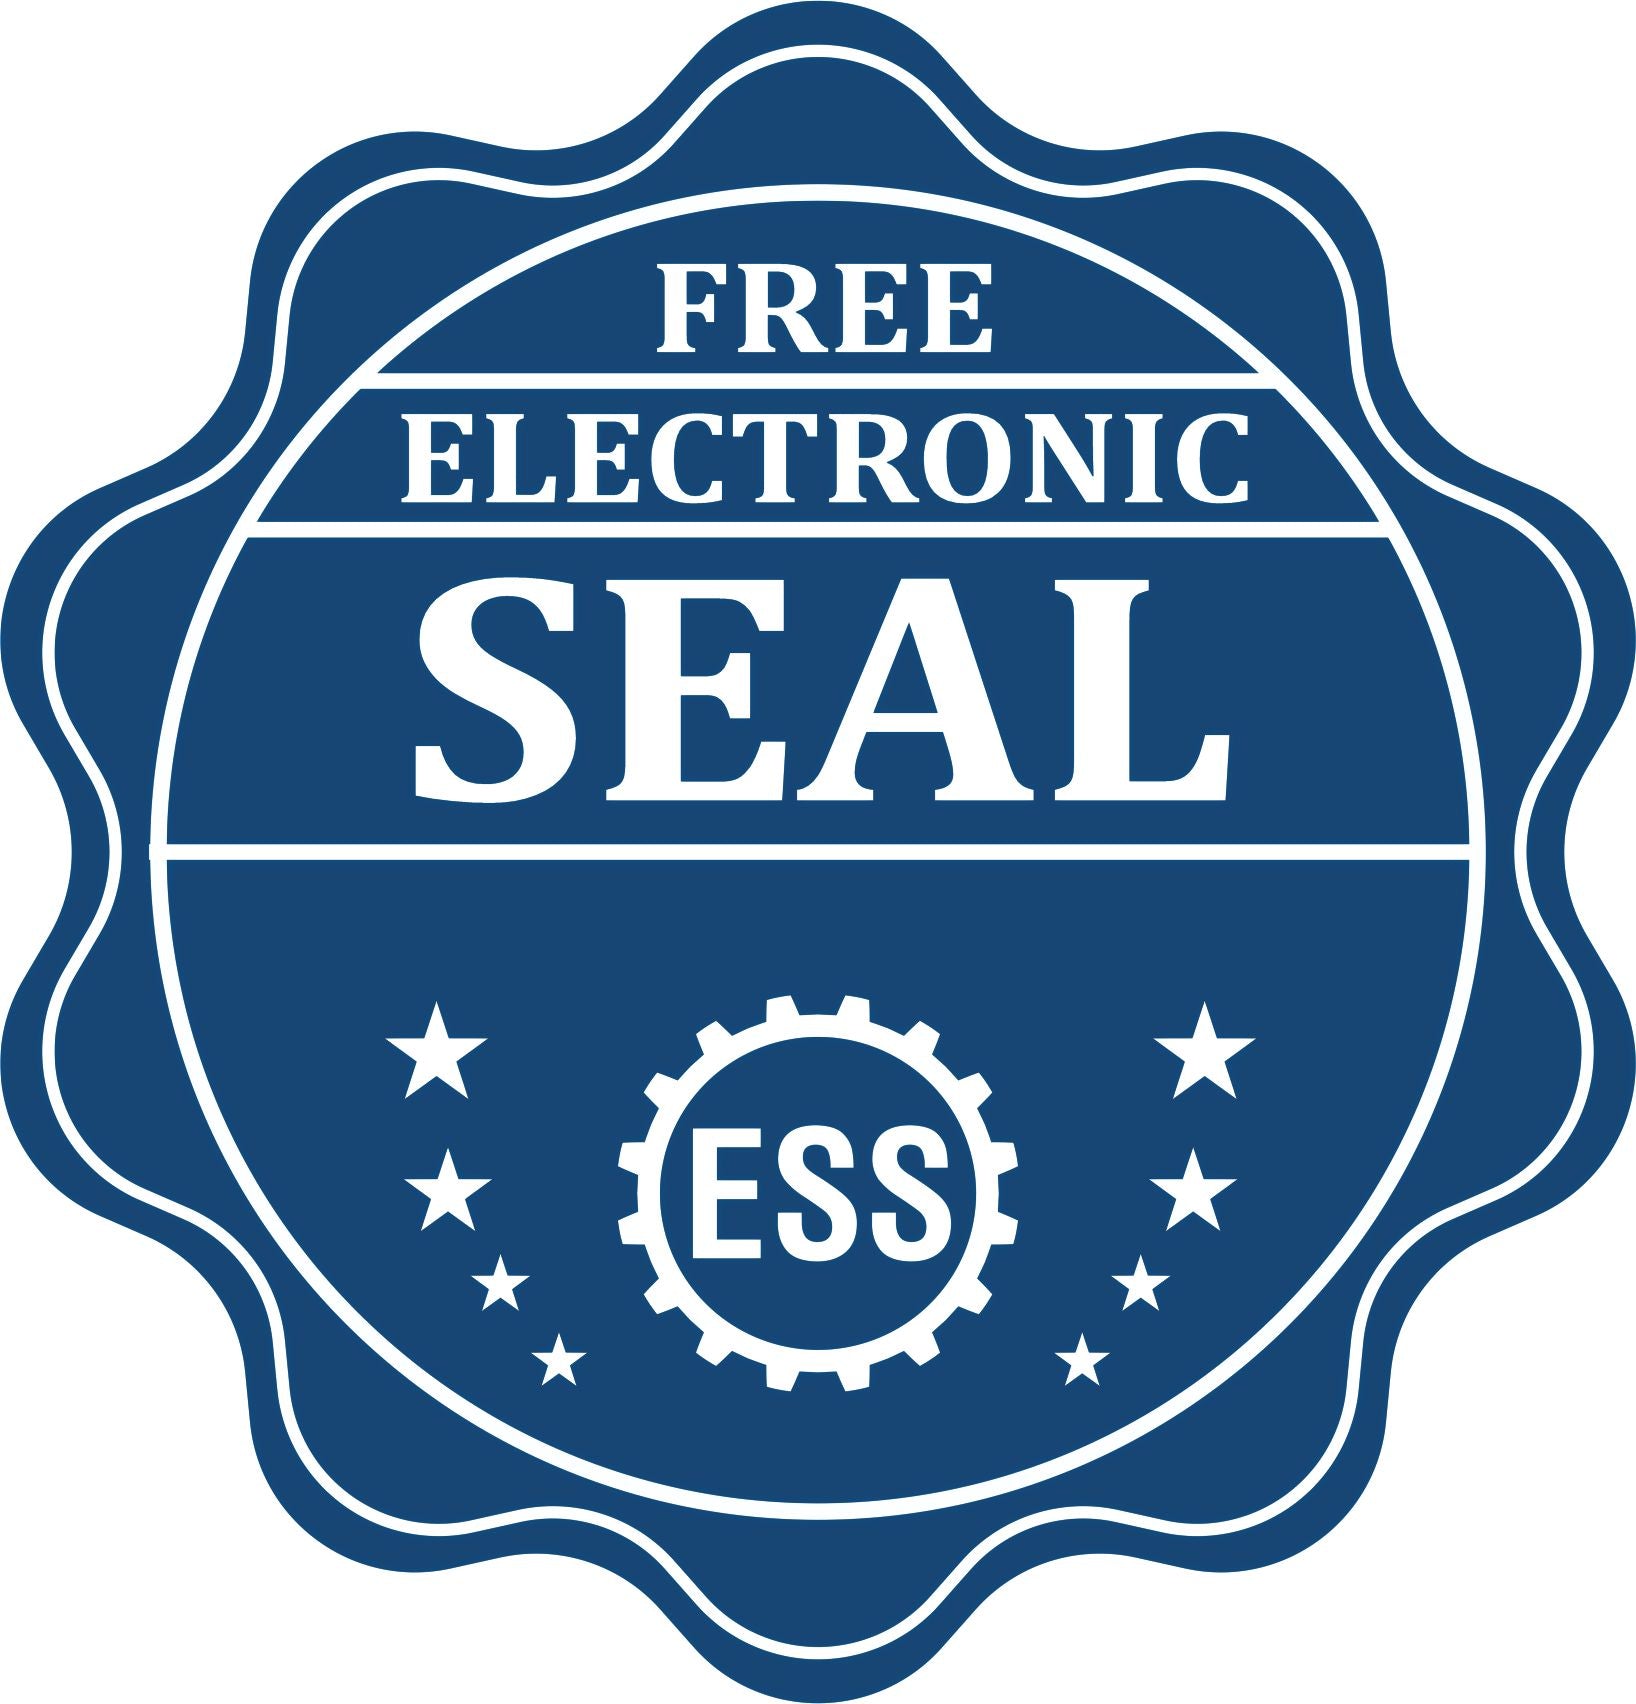 A badge showing a free electronic seal for the Premium MaxLight Pre-Inked New York Landscape Architectural Stamp with stars and the ESS gear on the emblem.